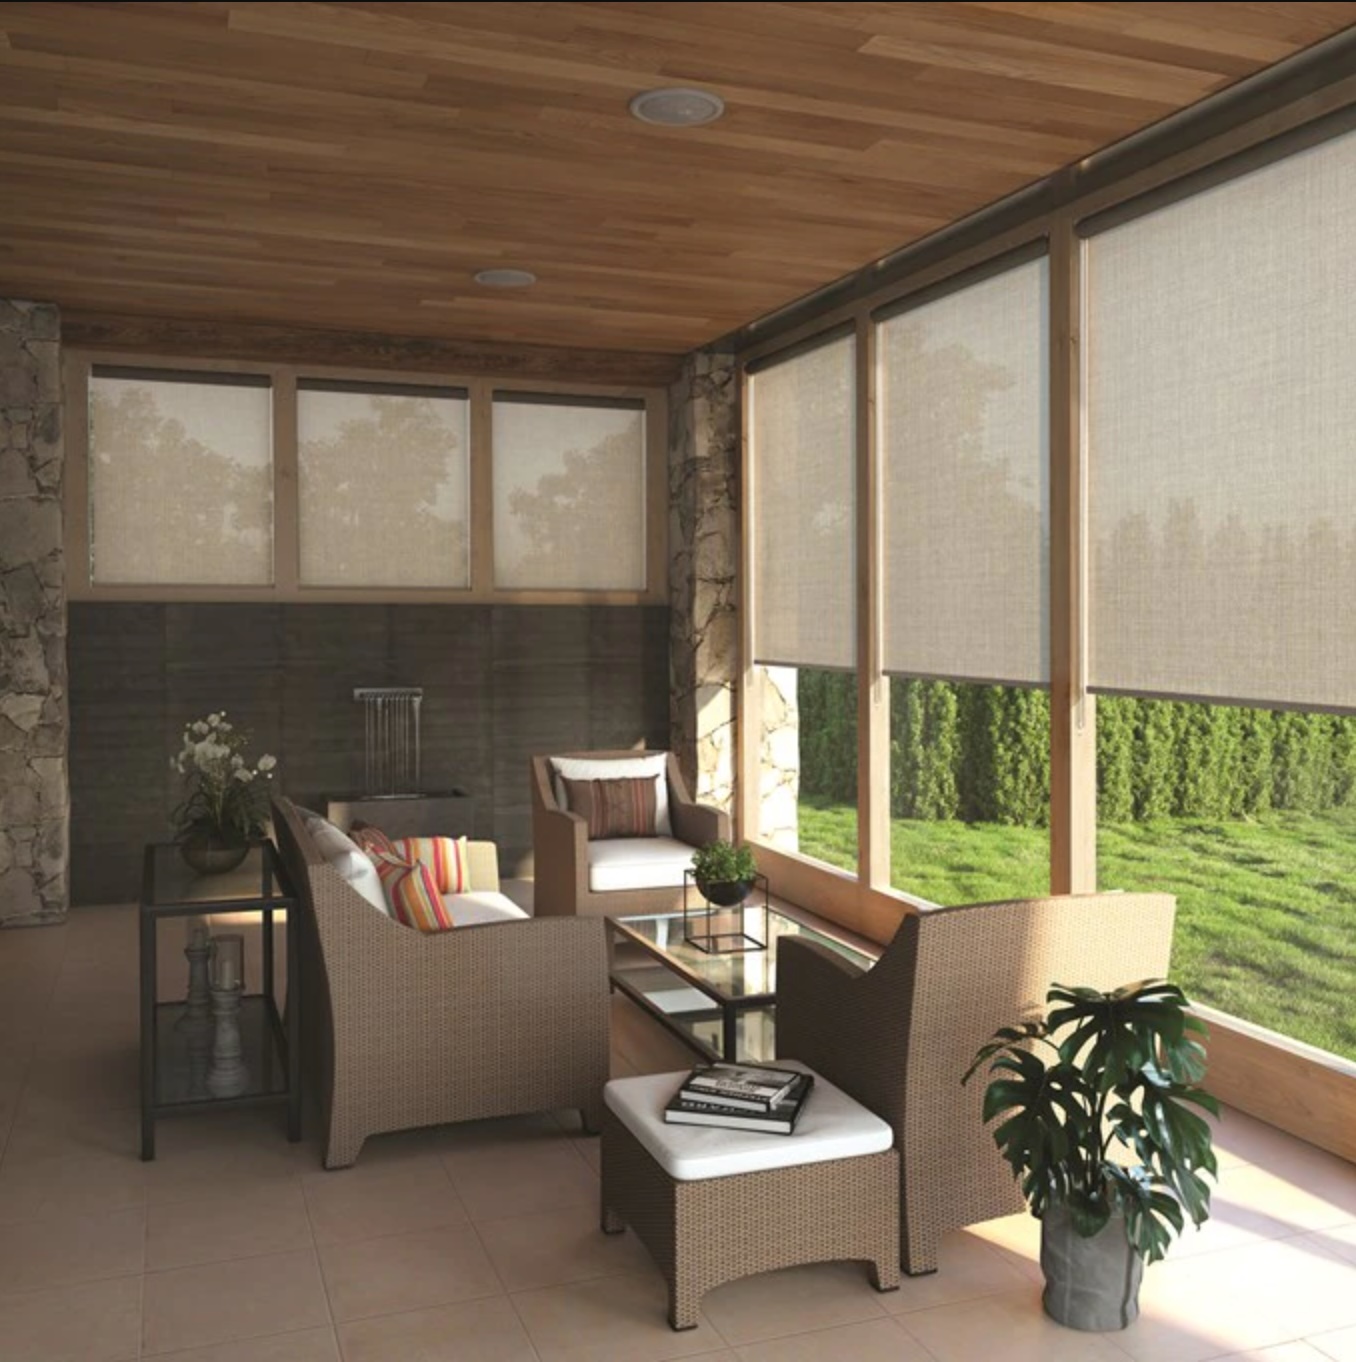 Levolor's Solar Roller Shades (in 18% Champagne) Shield a Sunroom from UV Rays